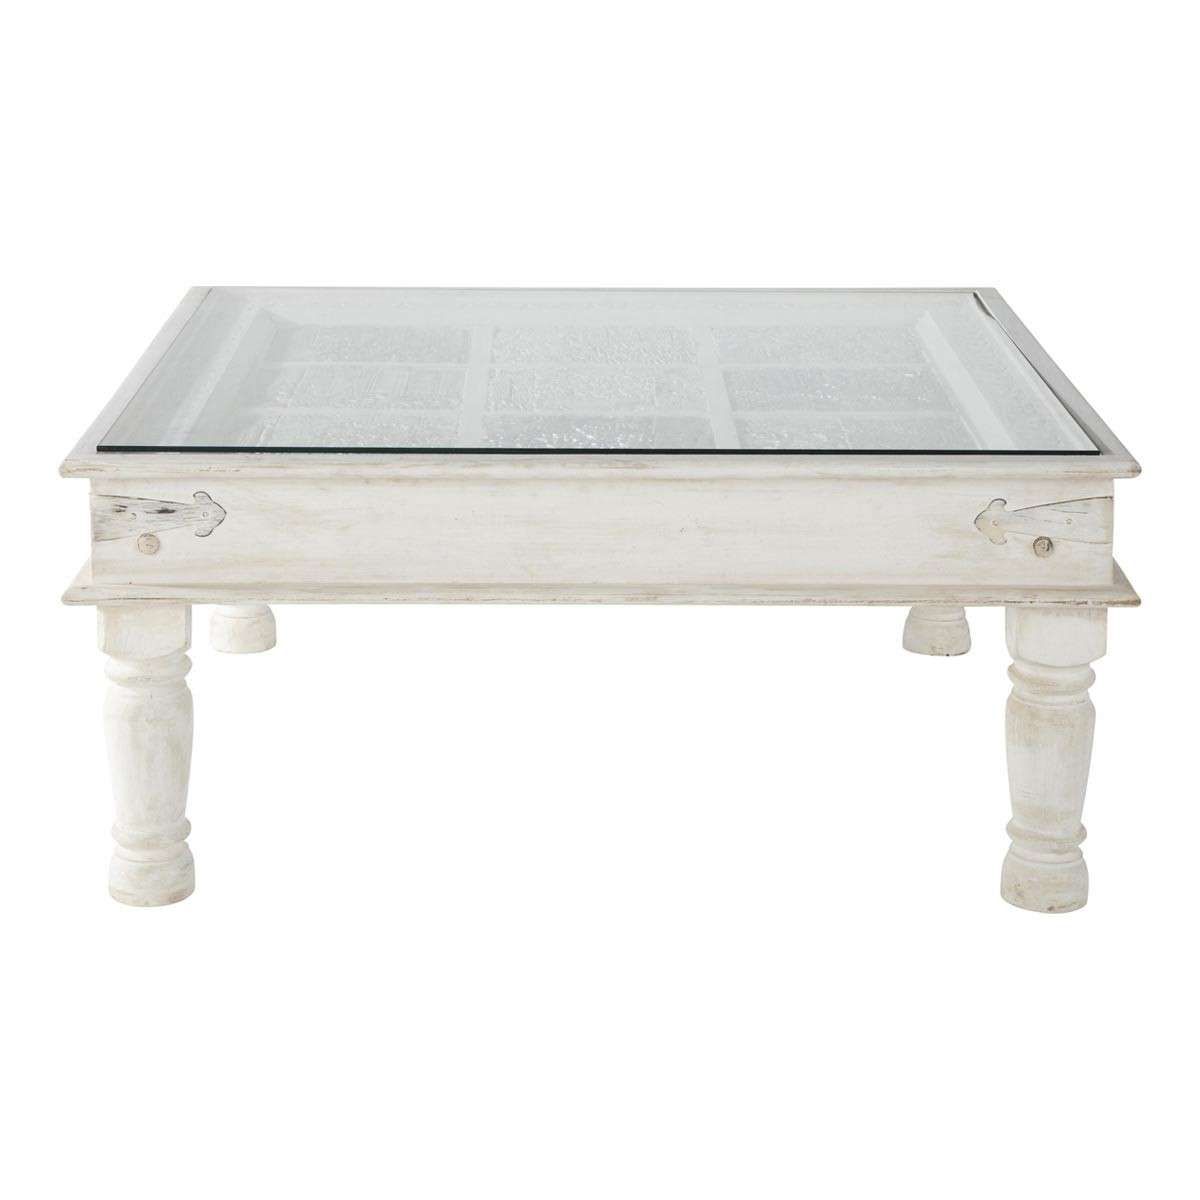 French Country Carved Wood Square White Coffee Table With Glass Pertaining To Well Liked Square White Coffee Tables (View 11 of 20)